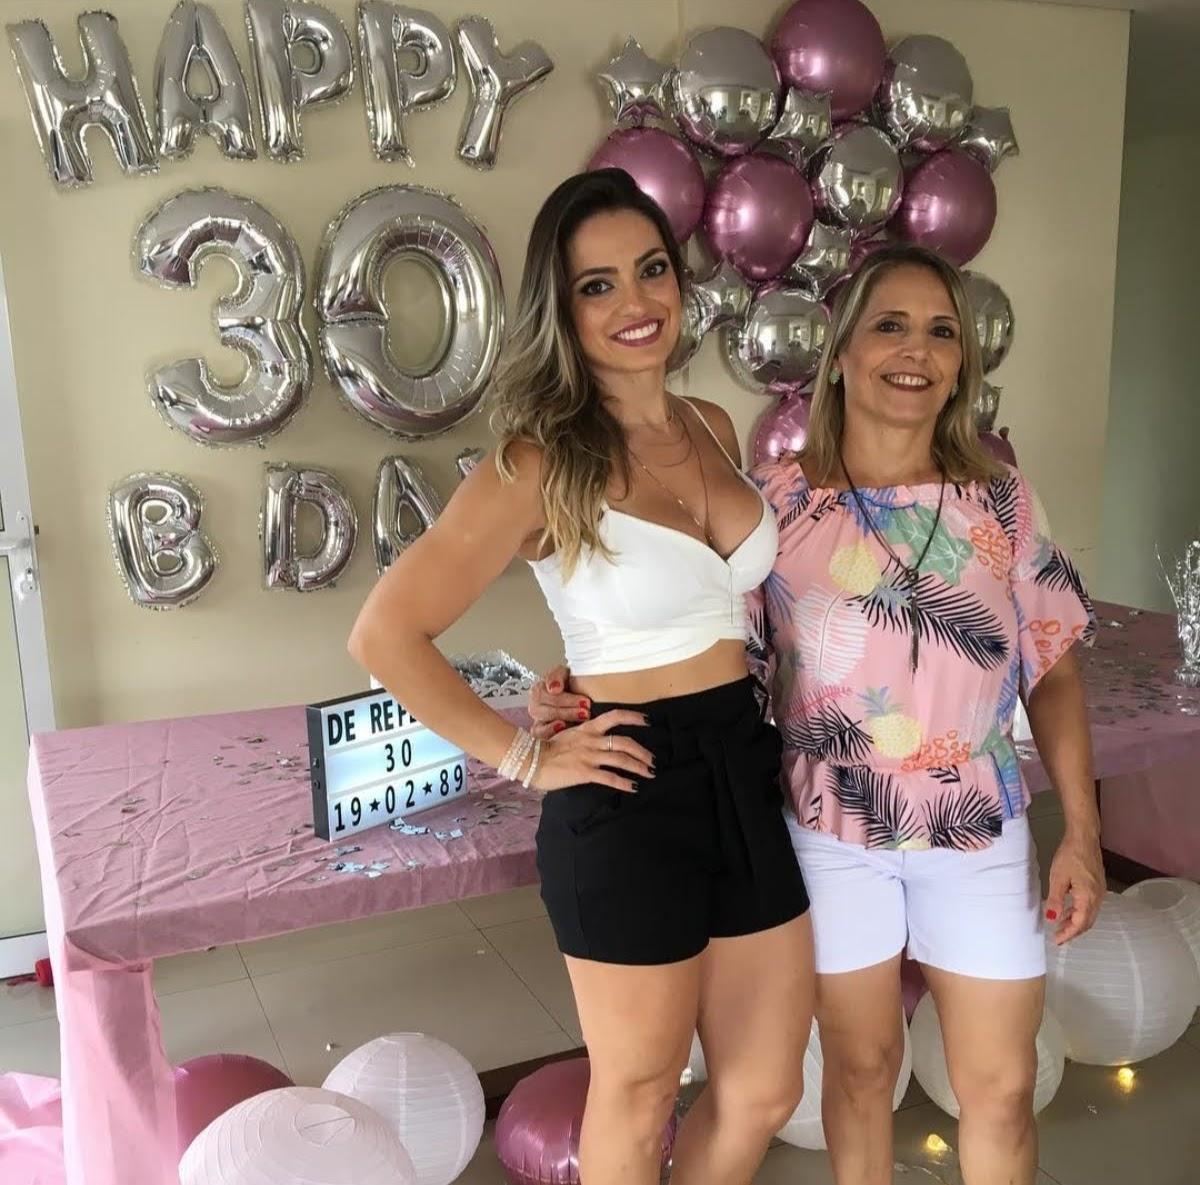 Daughter just turned 30 